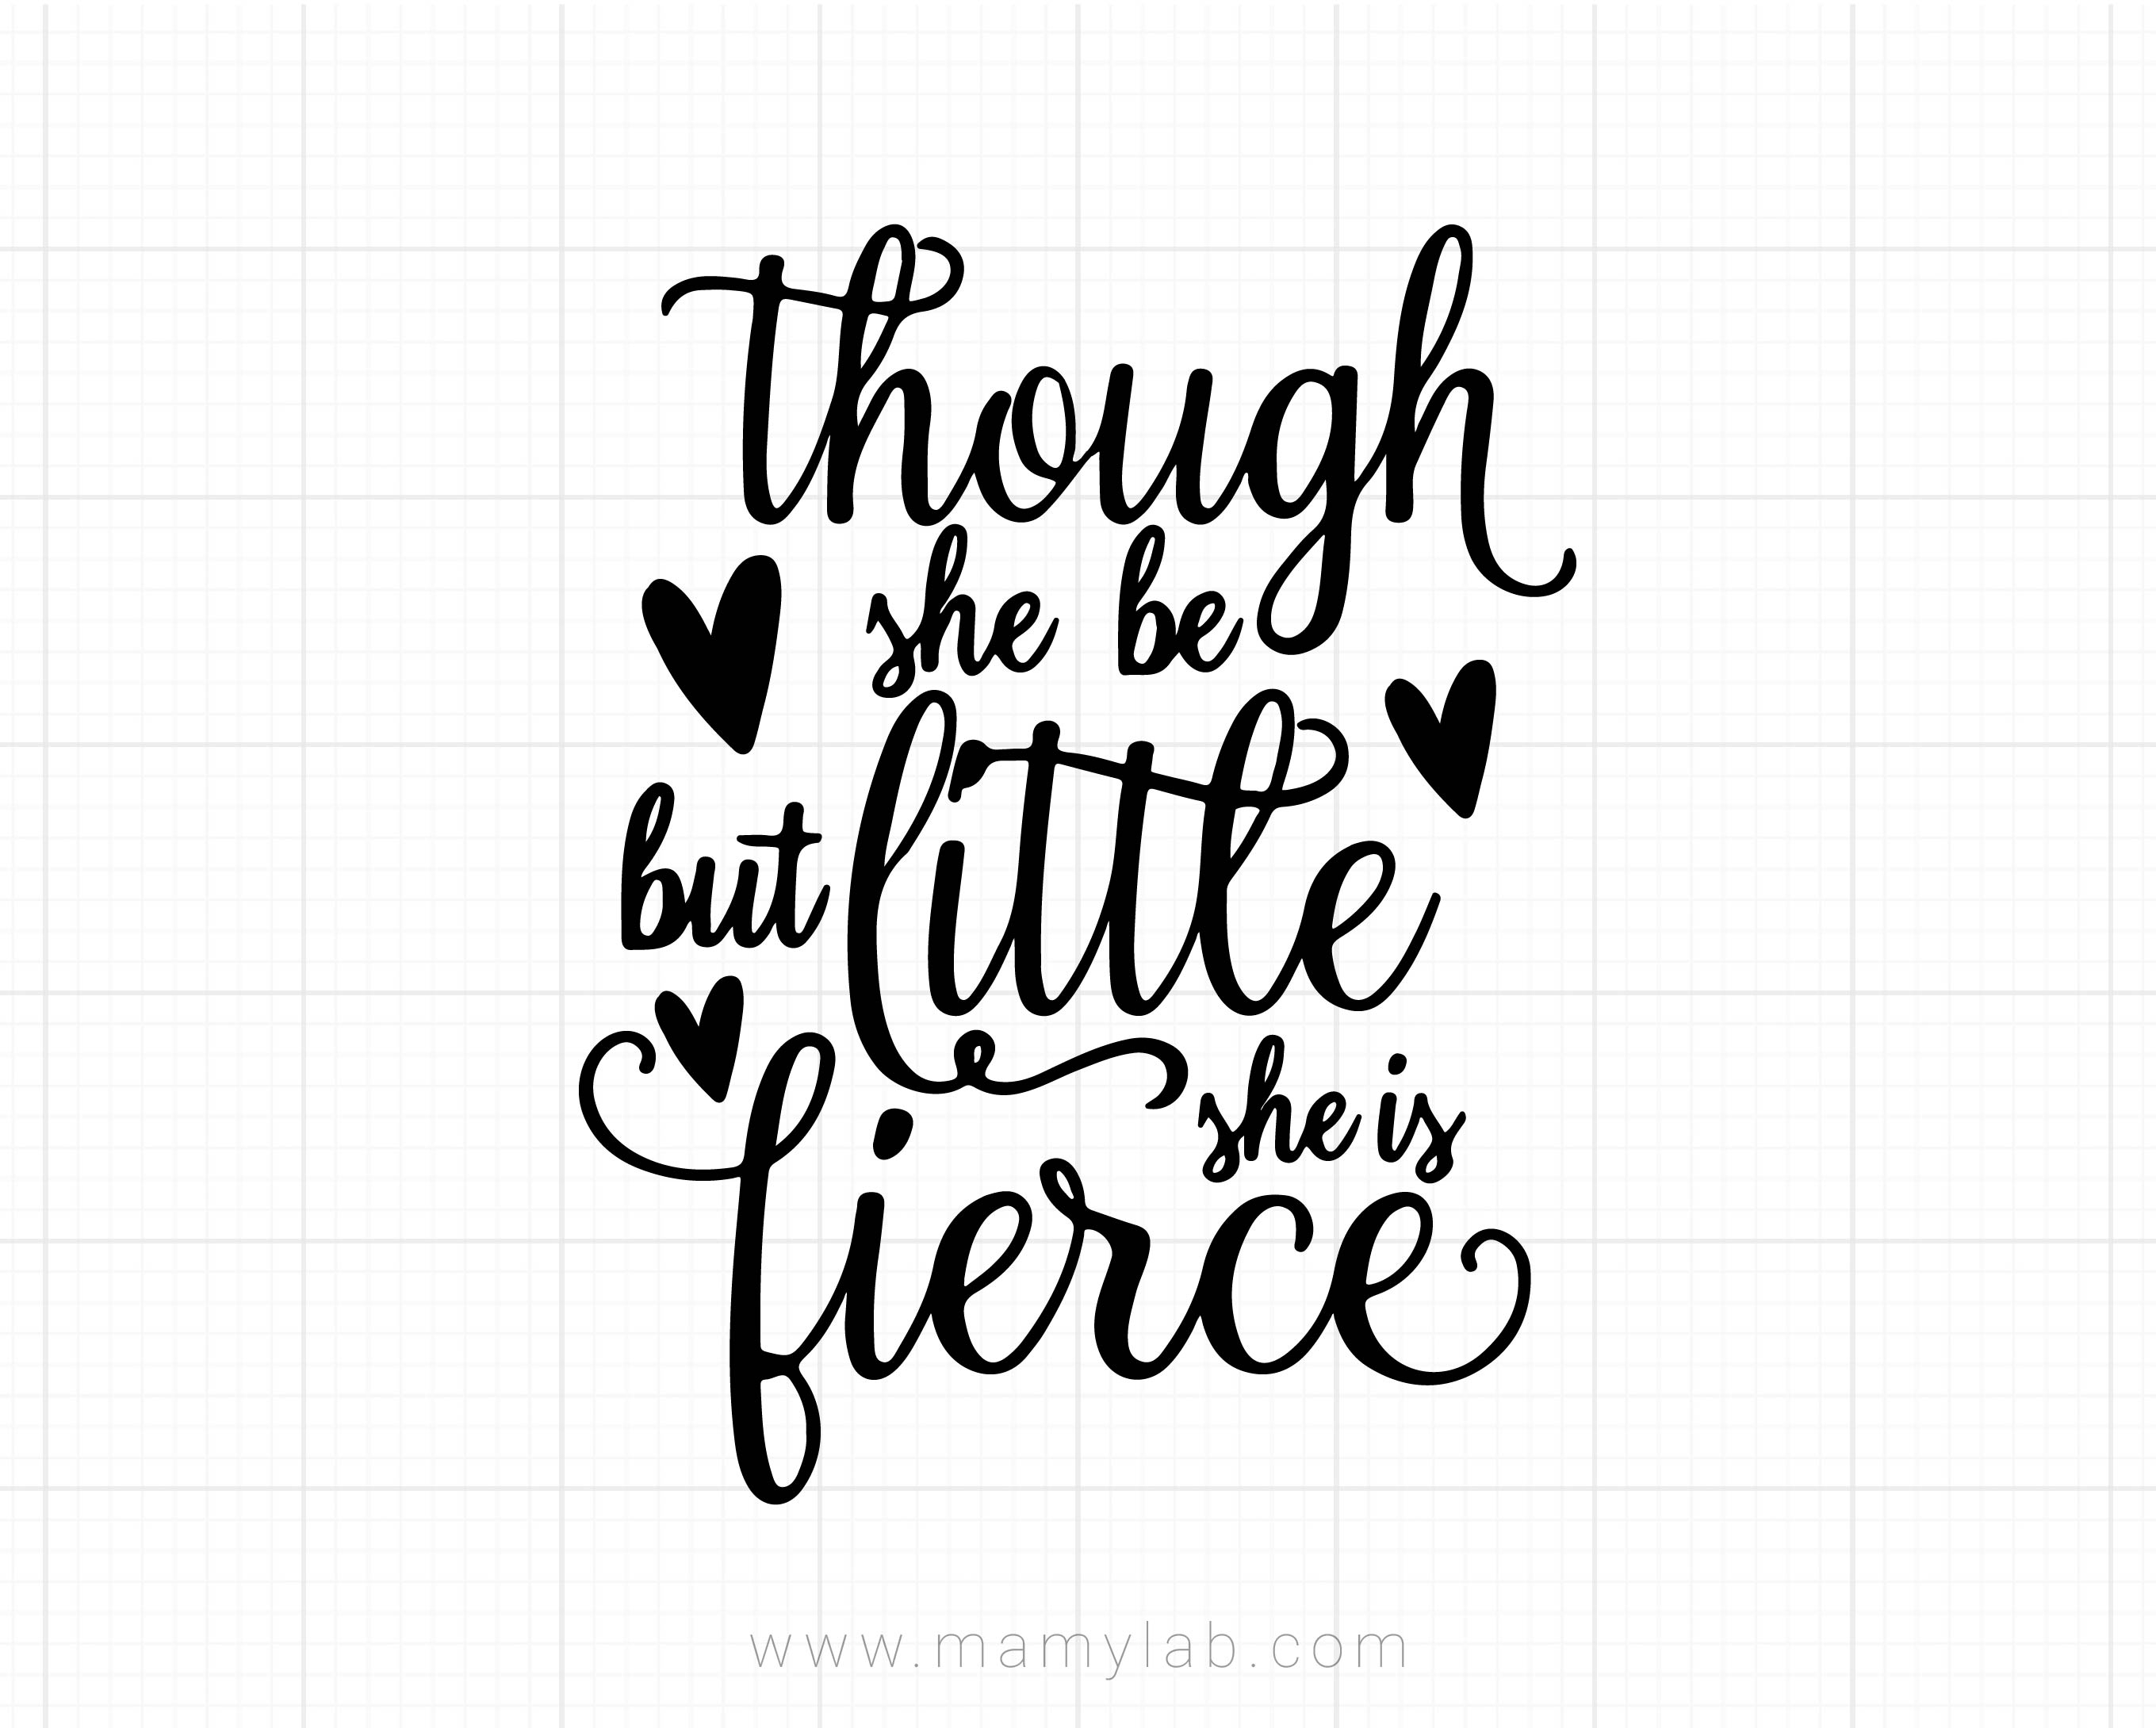 Download Clip Art Art Collectibles Svg Files For Cricut Svg Cut Files Baby Girl Svg Quotes And Though She Be But Little She Is Fierce Svg